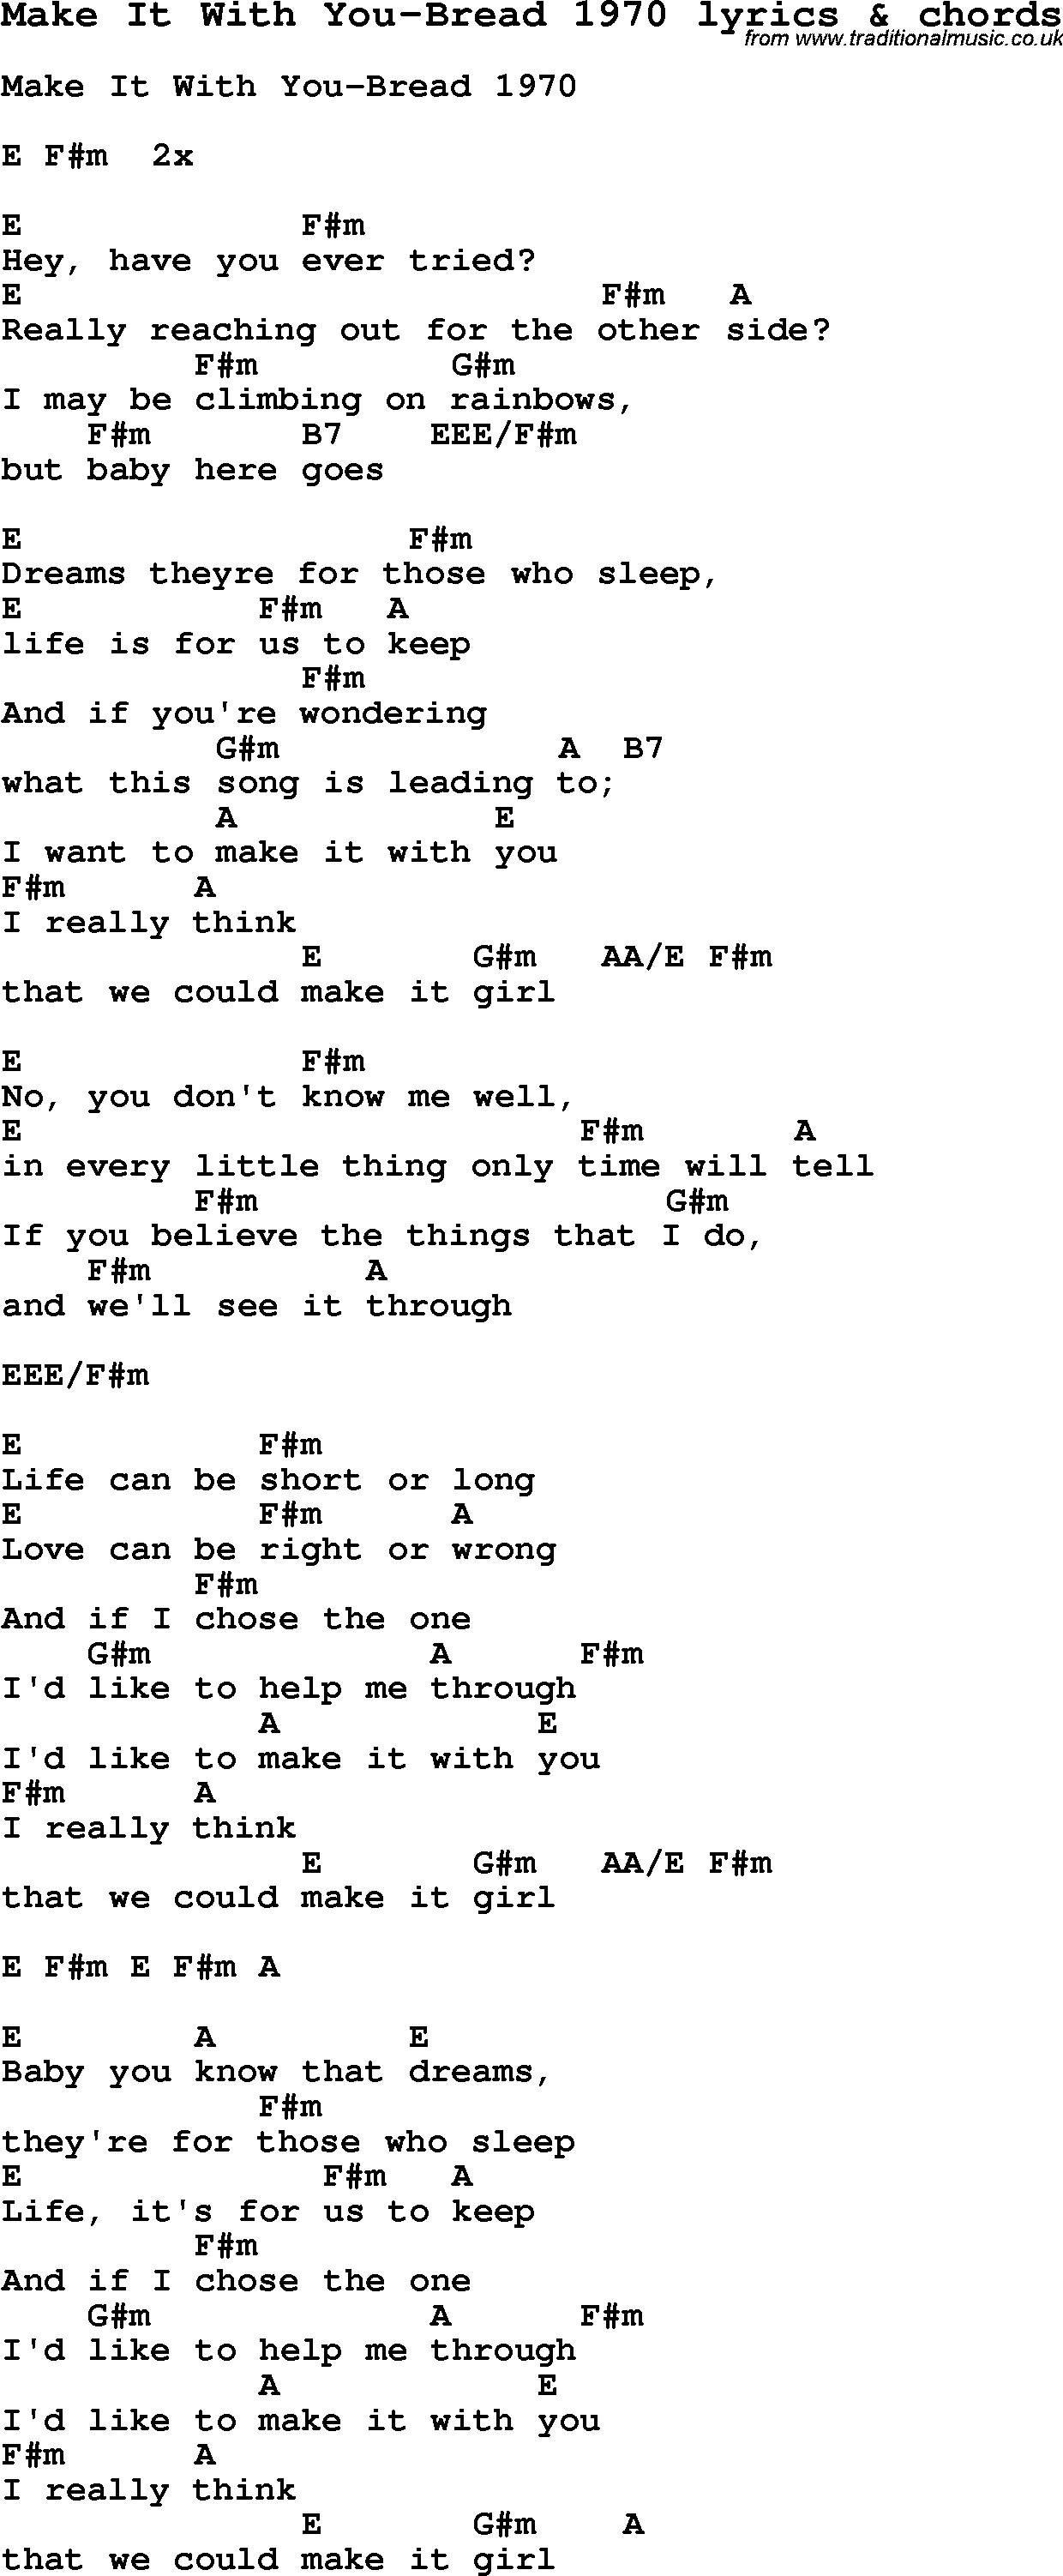 Love Song Lyrics for: Make It With You-Bread 1970 with chords for Ukulele, Guitar Banjo etc.